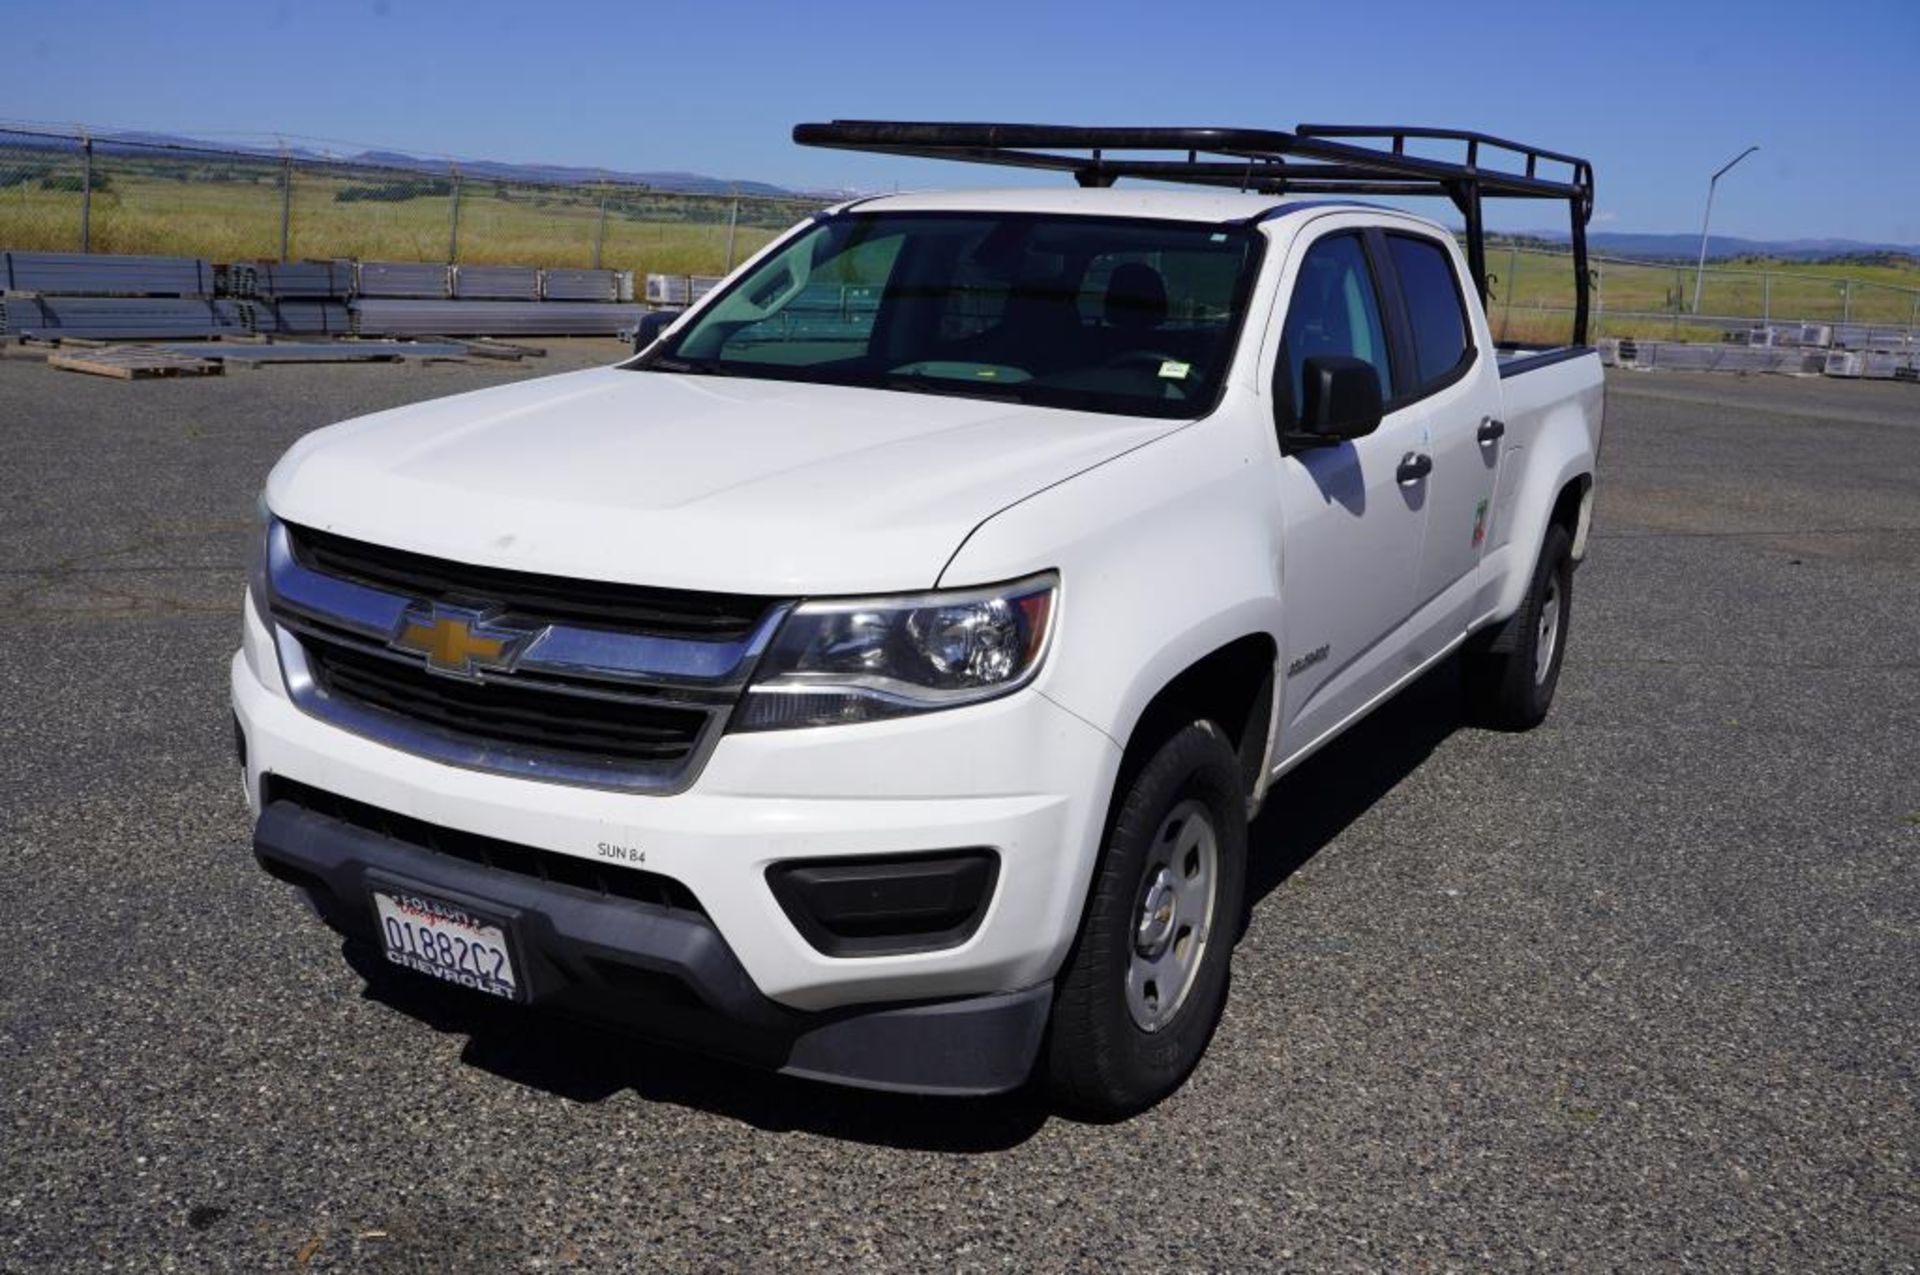 2016 Chevy Colorado Pick Up Truck - Image 2 of 13